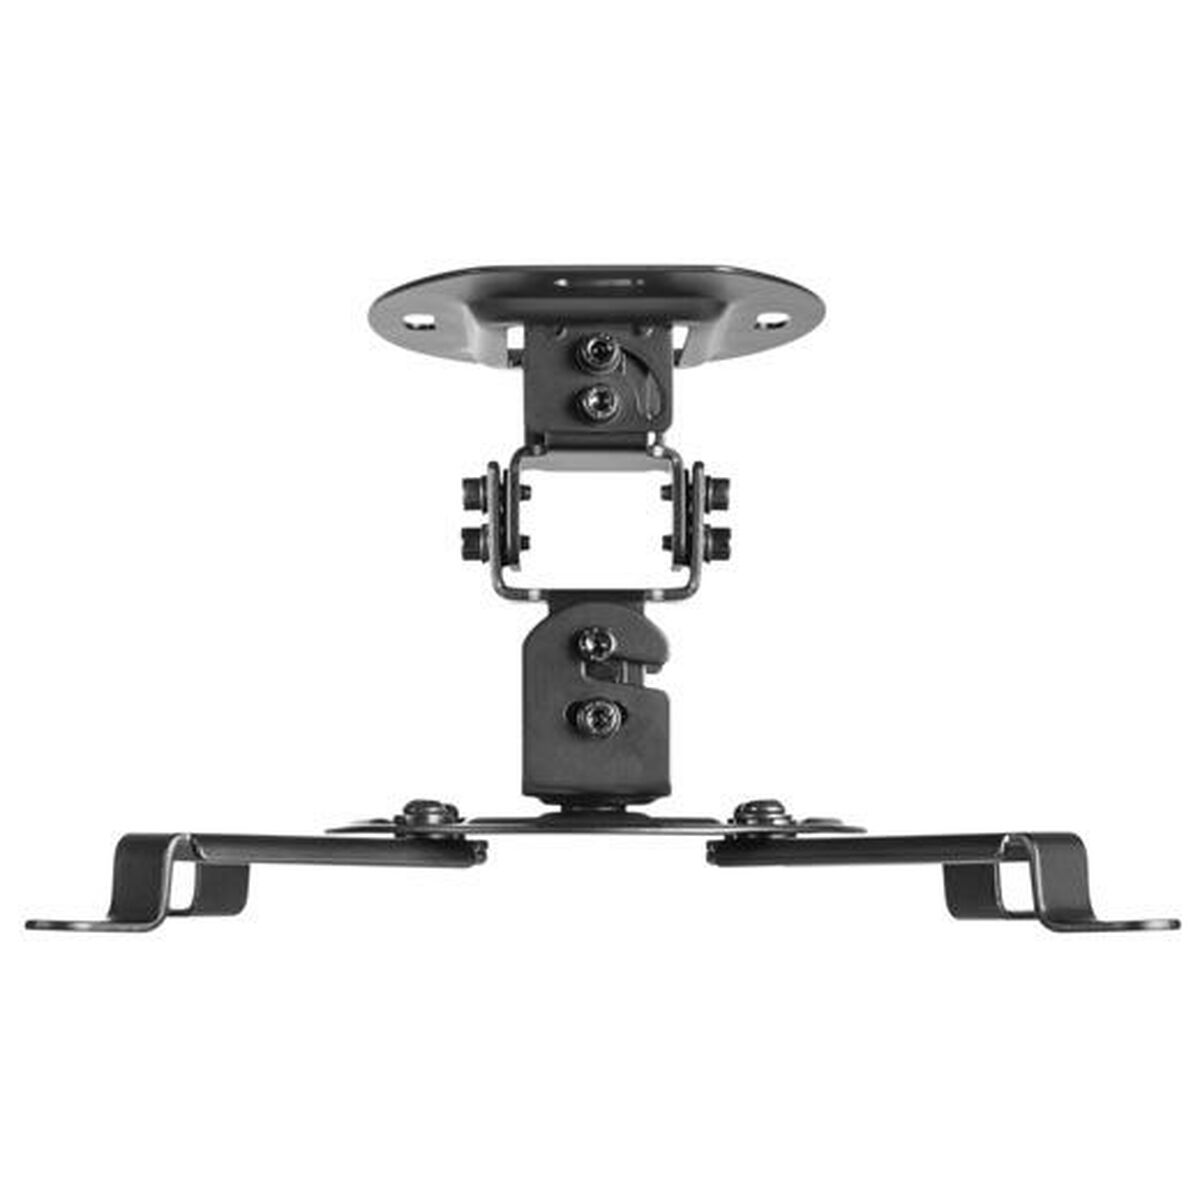 Ceiling Mount for Projectors Aisens CP03TSR-127, Aisens, Electronics, TV, Video and home cinema, ceiling-mount-for-projectors-aisens-cp03tsr-127-black, Brand_Aisens, category-reference-2609, category-reference-2642, category-reference-2947, category-reference-t-18805, category-reference-t-19653, category-reference-t-19921, category-reference-t-21391, computers / peripherals, Condition_NEW, office, Price_20 - 50, Teleworking, RiotNook